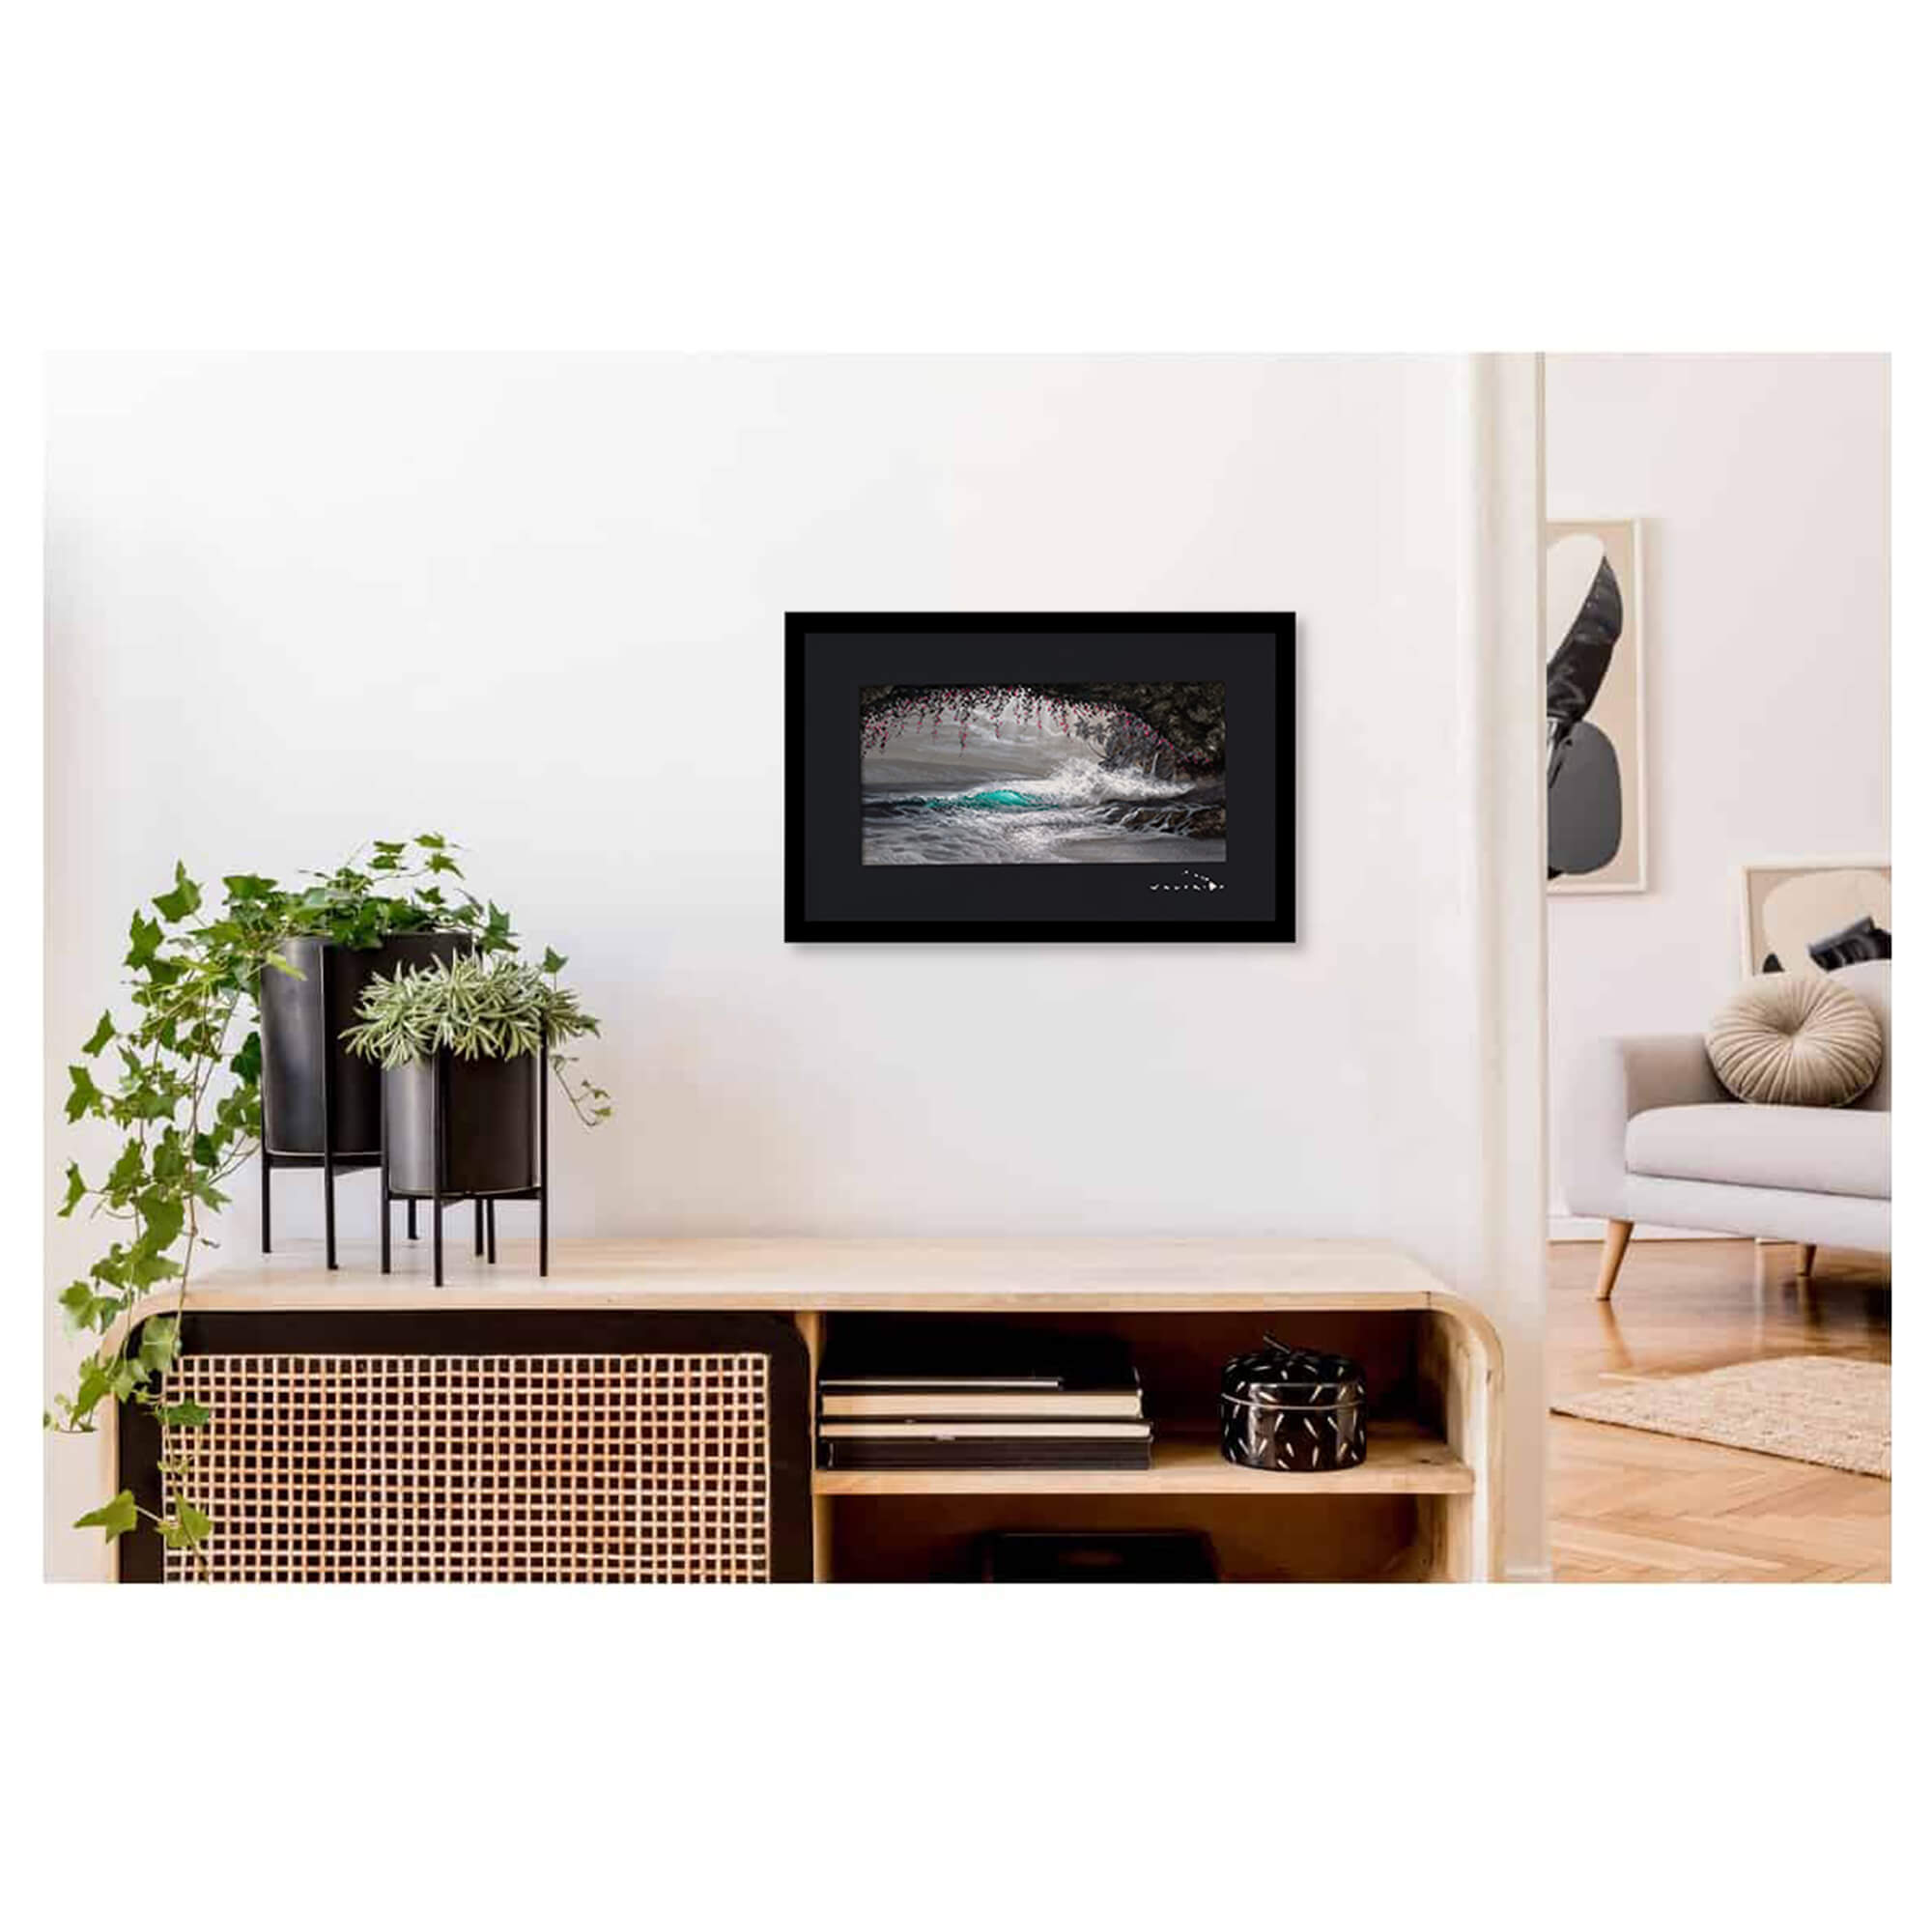 Framed matted art print of a black and white, with a touch of pink and teal, wave as seen from a cove by Hawaii artist Walfrido Garcia